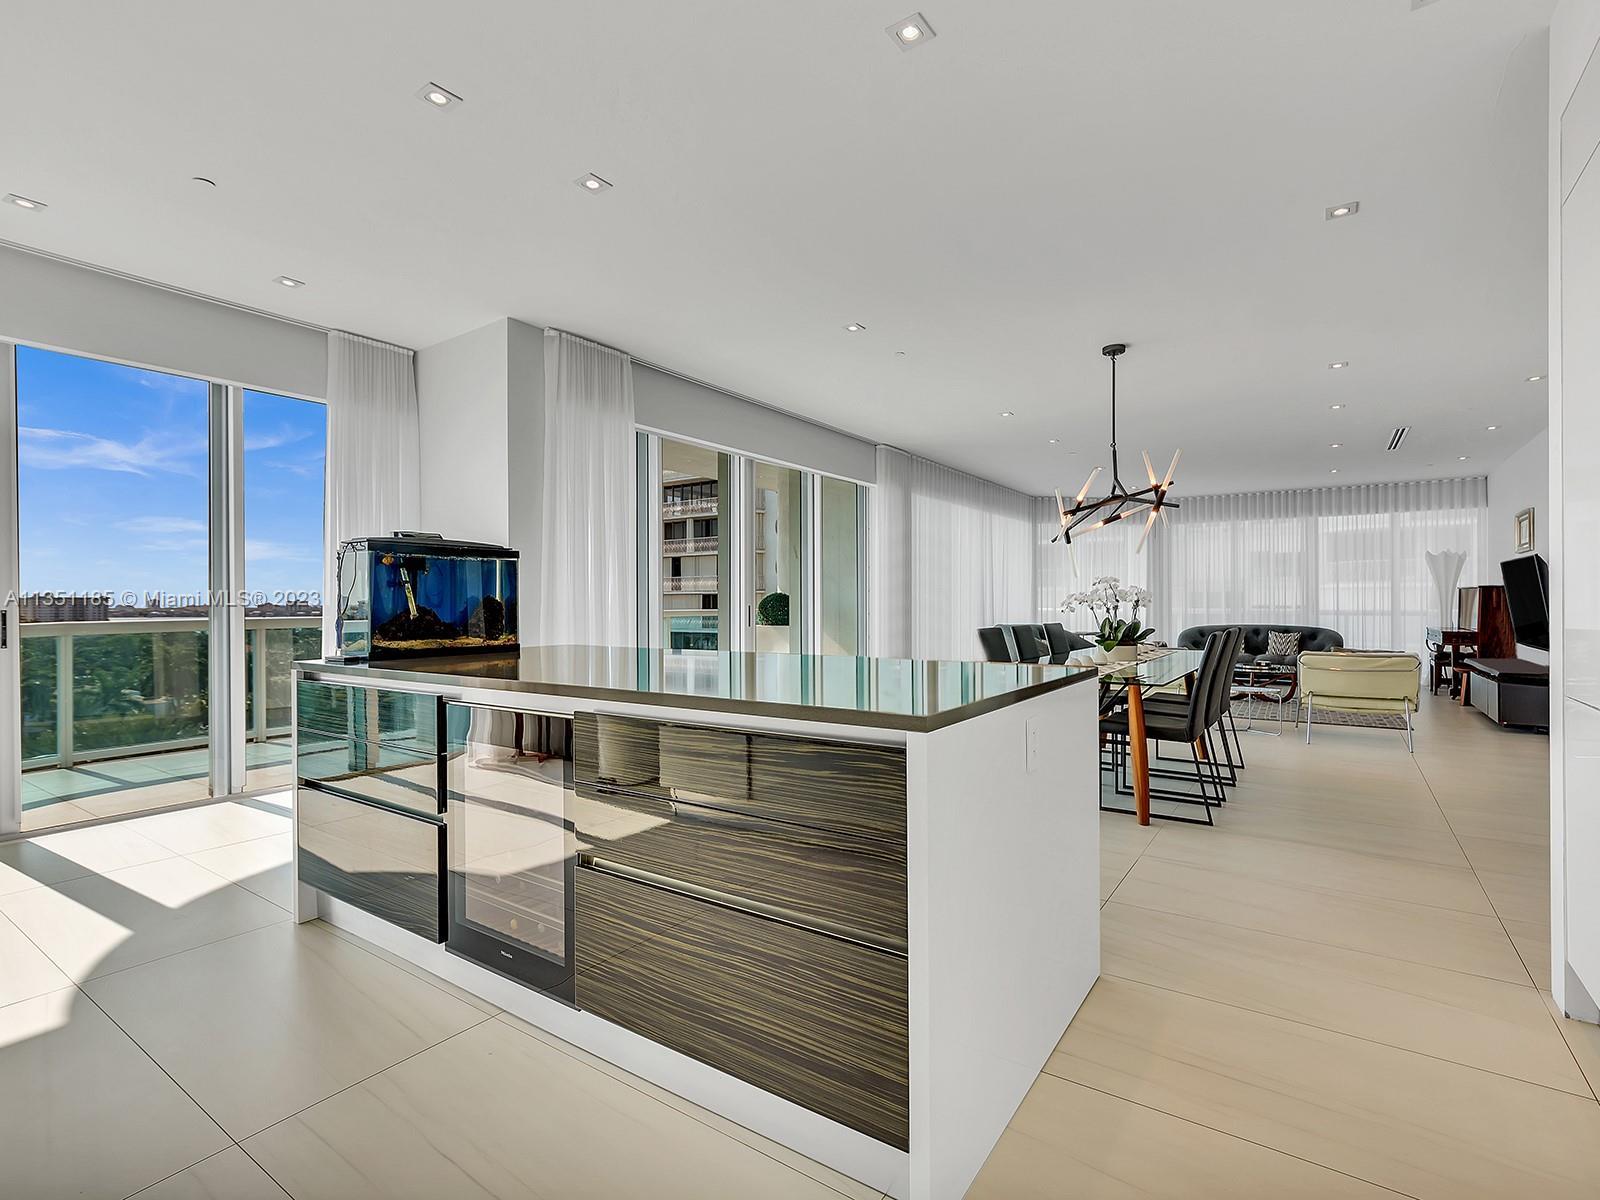 A True Gem 3 BEDROOMS 3 1/2 BATHS located in 1 of the most prestigious buildings in Bal Harbour. Lux